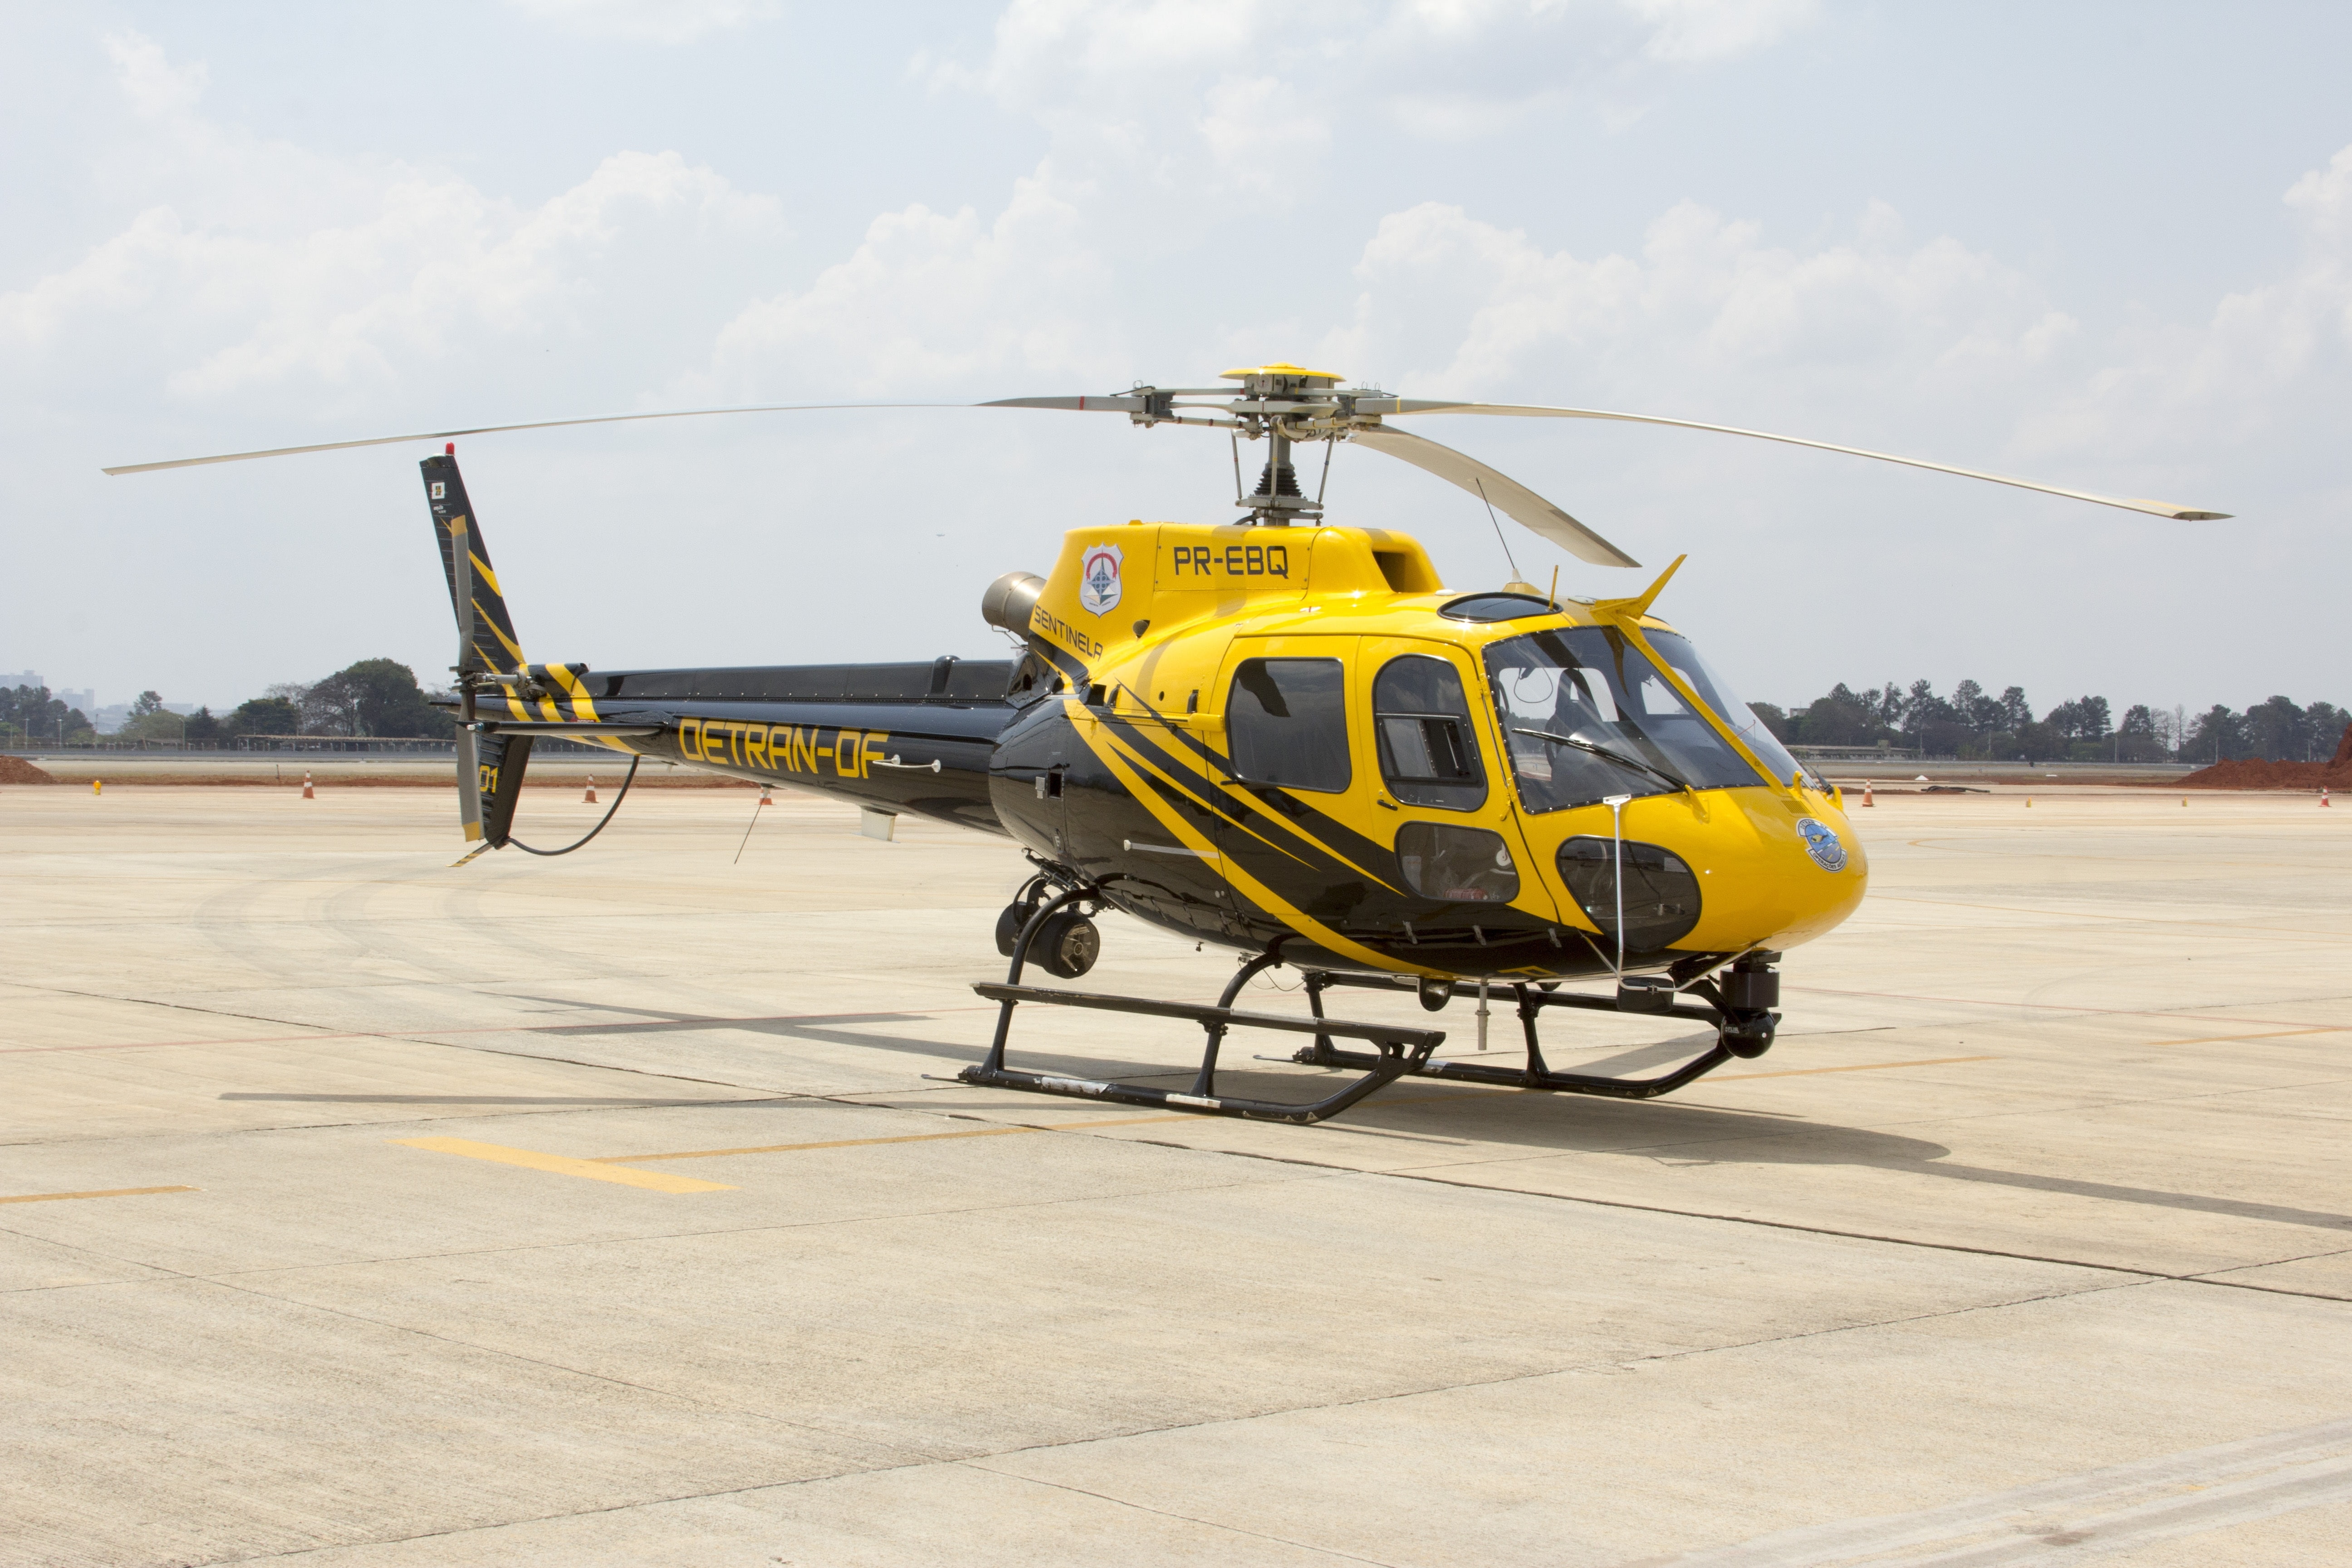 yellow helicopter, Vehicle, air vehicle, transportation, mode of transportation